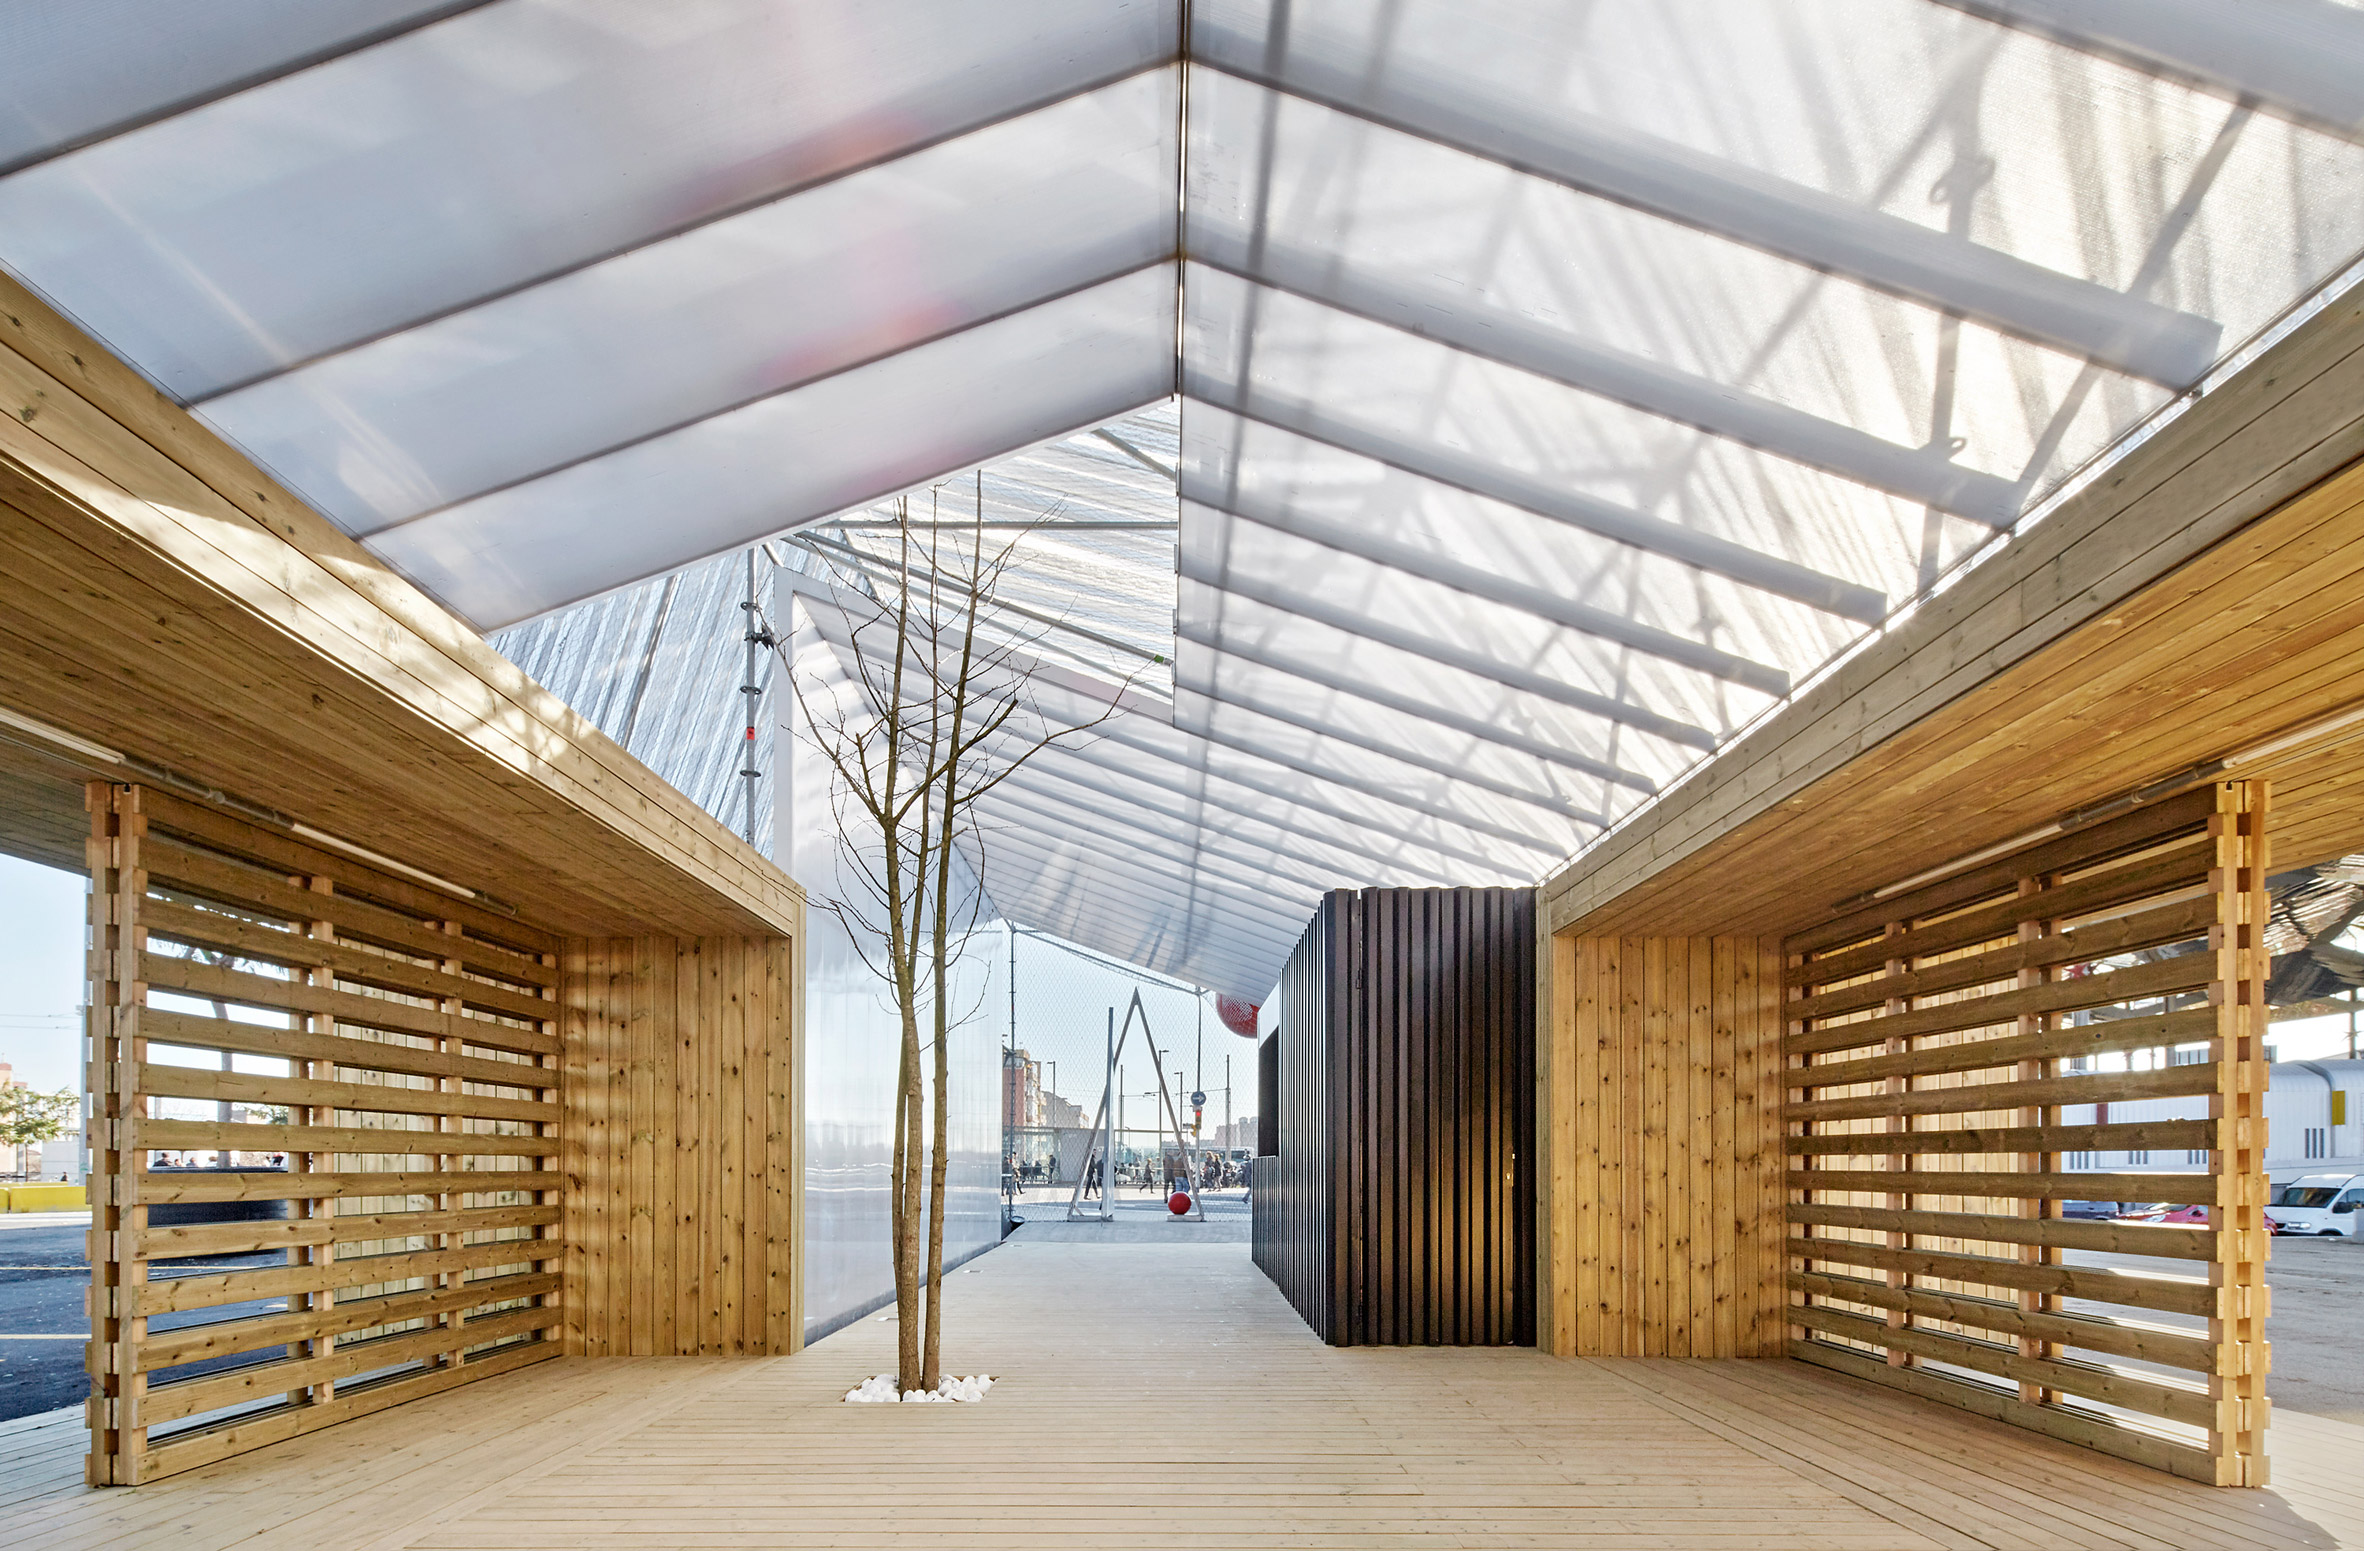 Information Point in Glorias Square by Peris + Toral Arquitectes